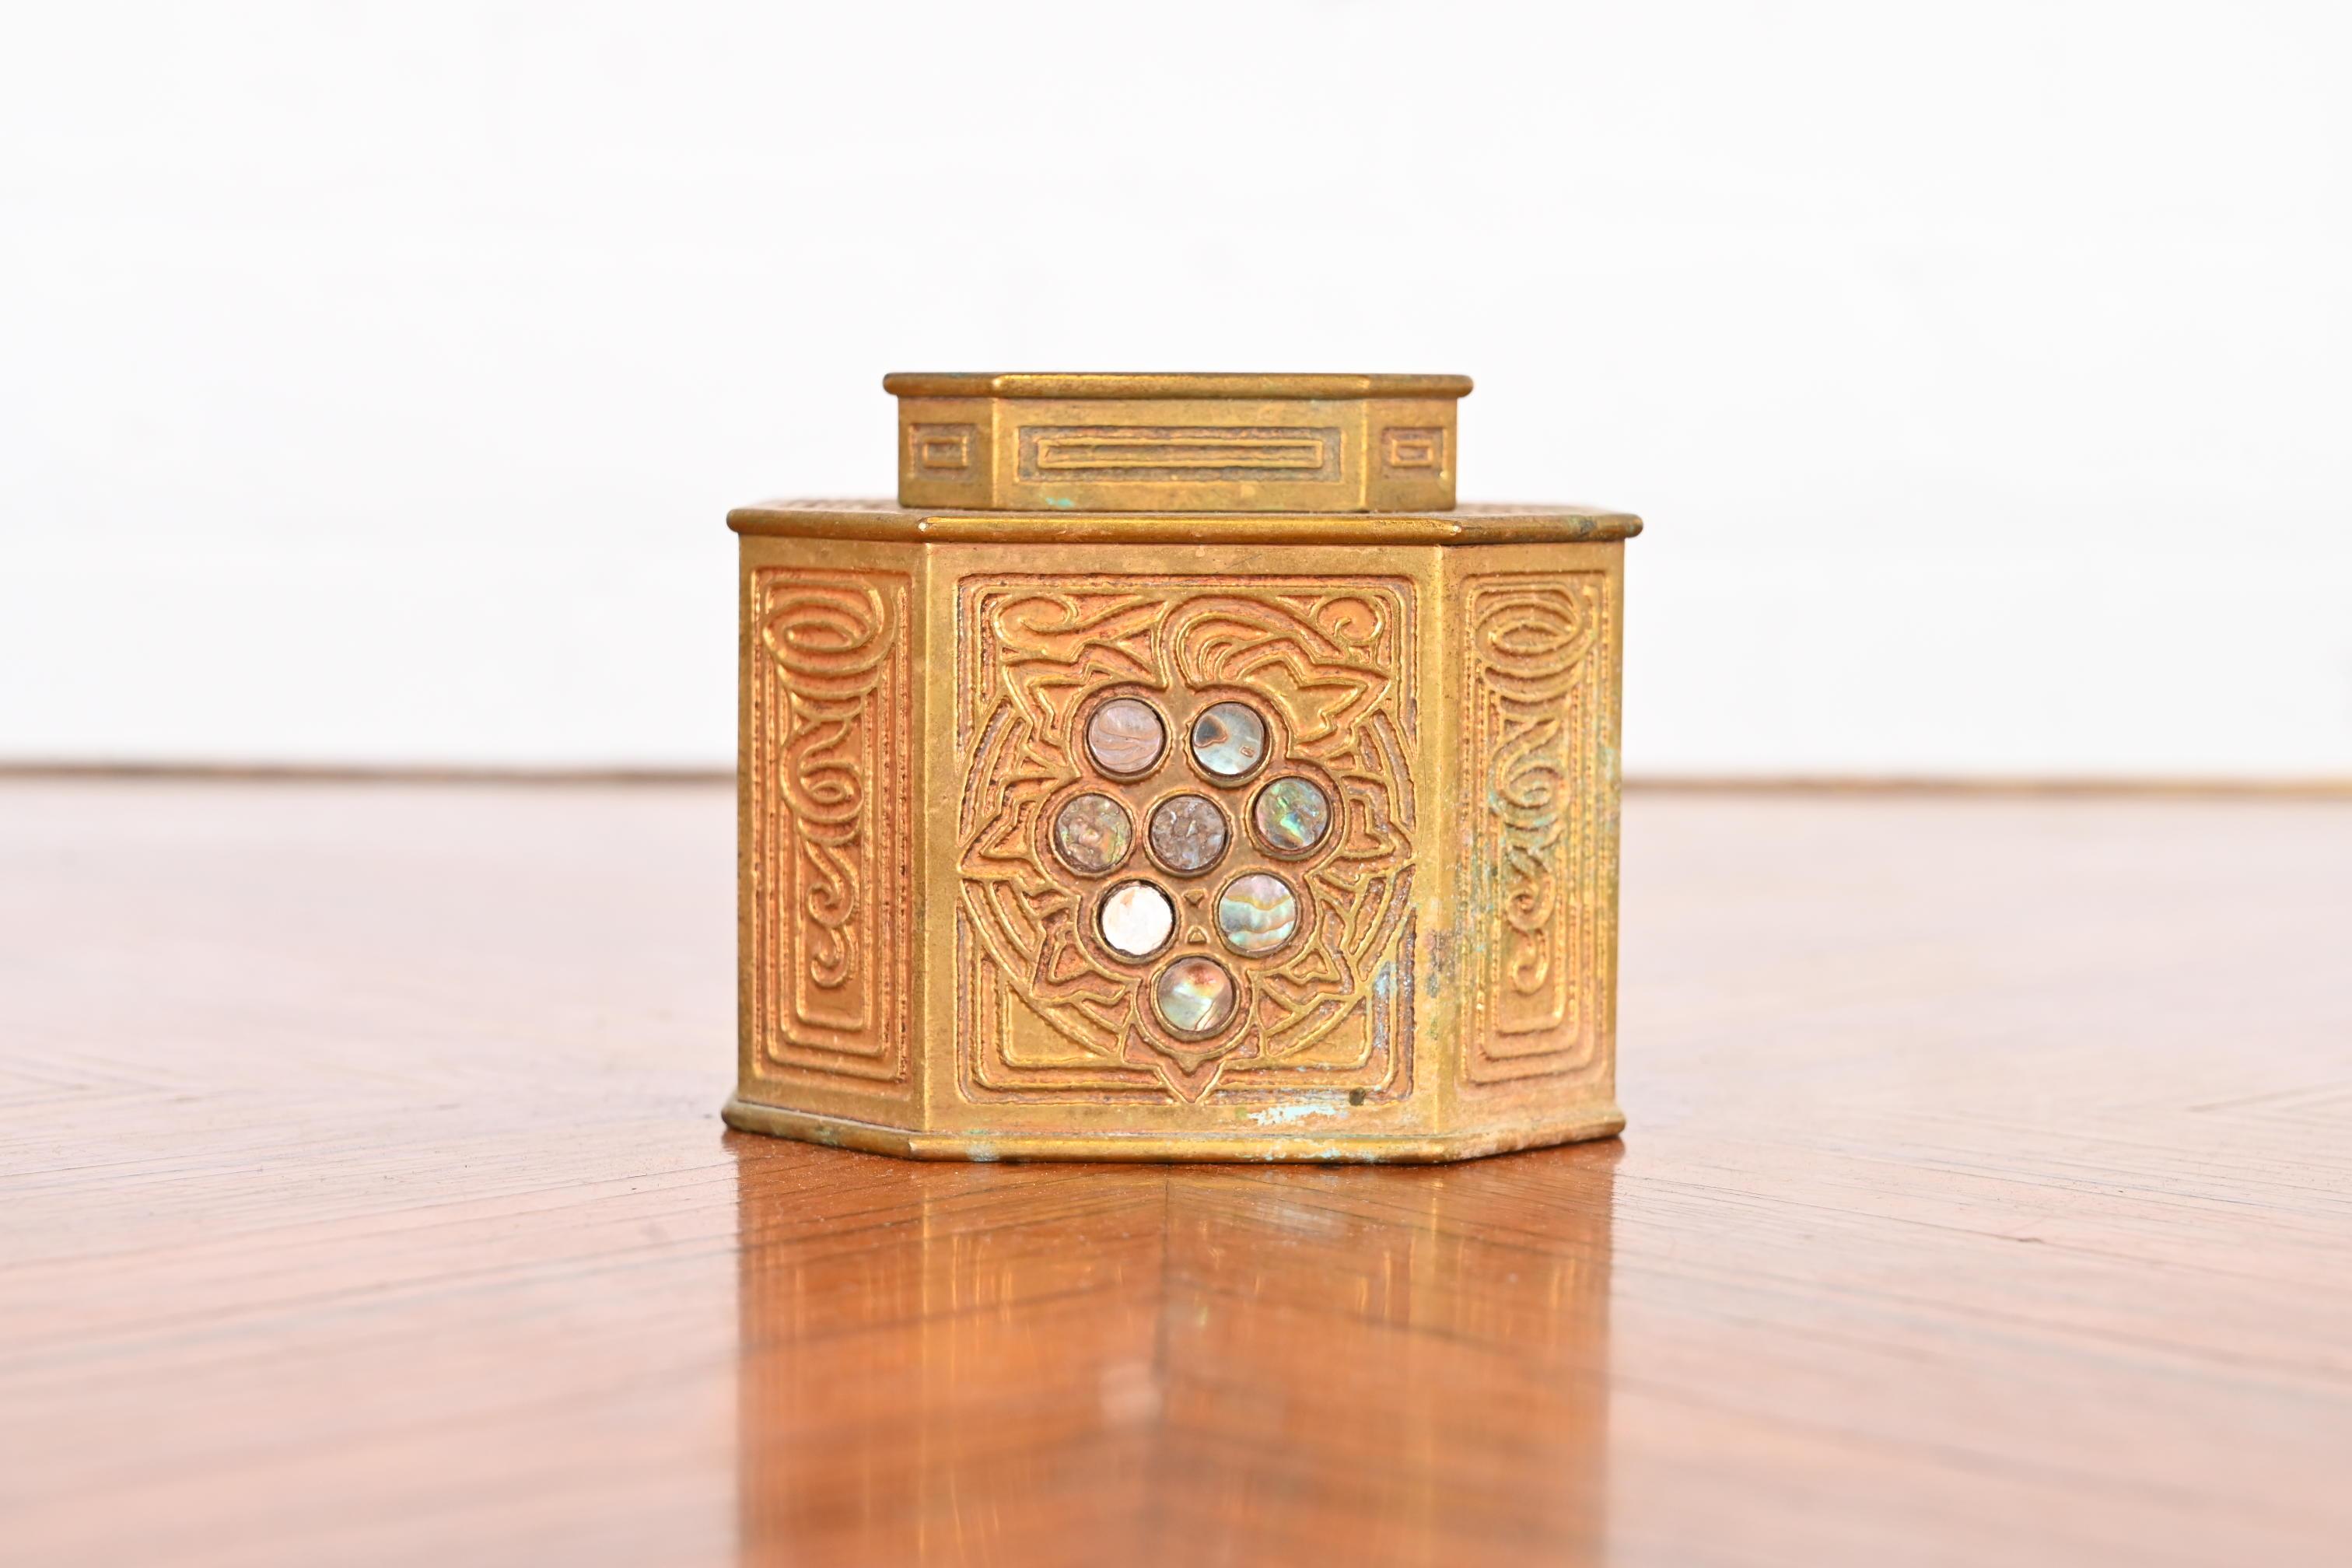 A gorgeous Art Deco period bronze doré and inlaid abalone inkwell

By Tiffany Studios

New York, USA, early 20th century

Measures: 3.75